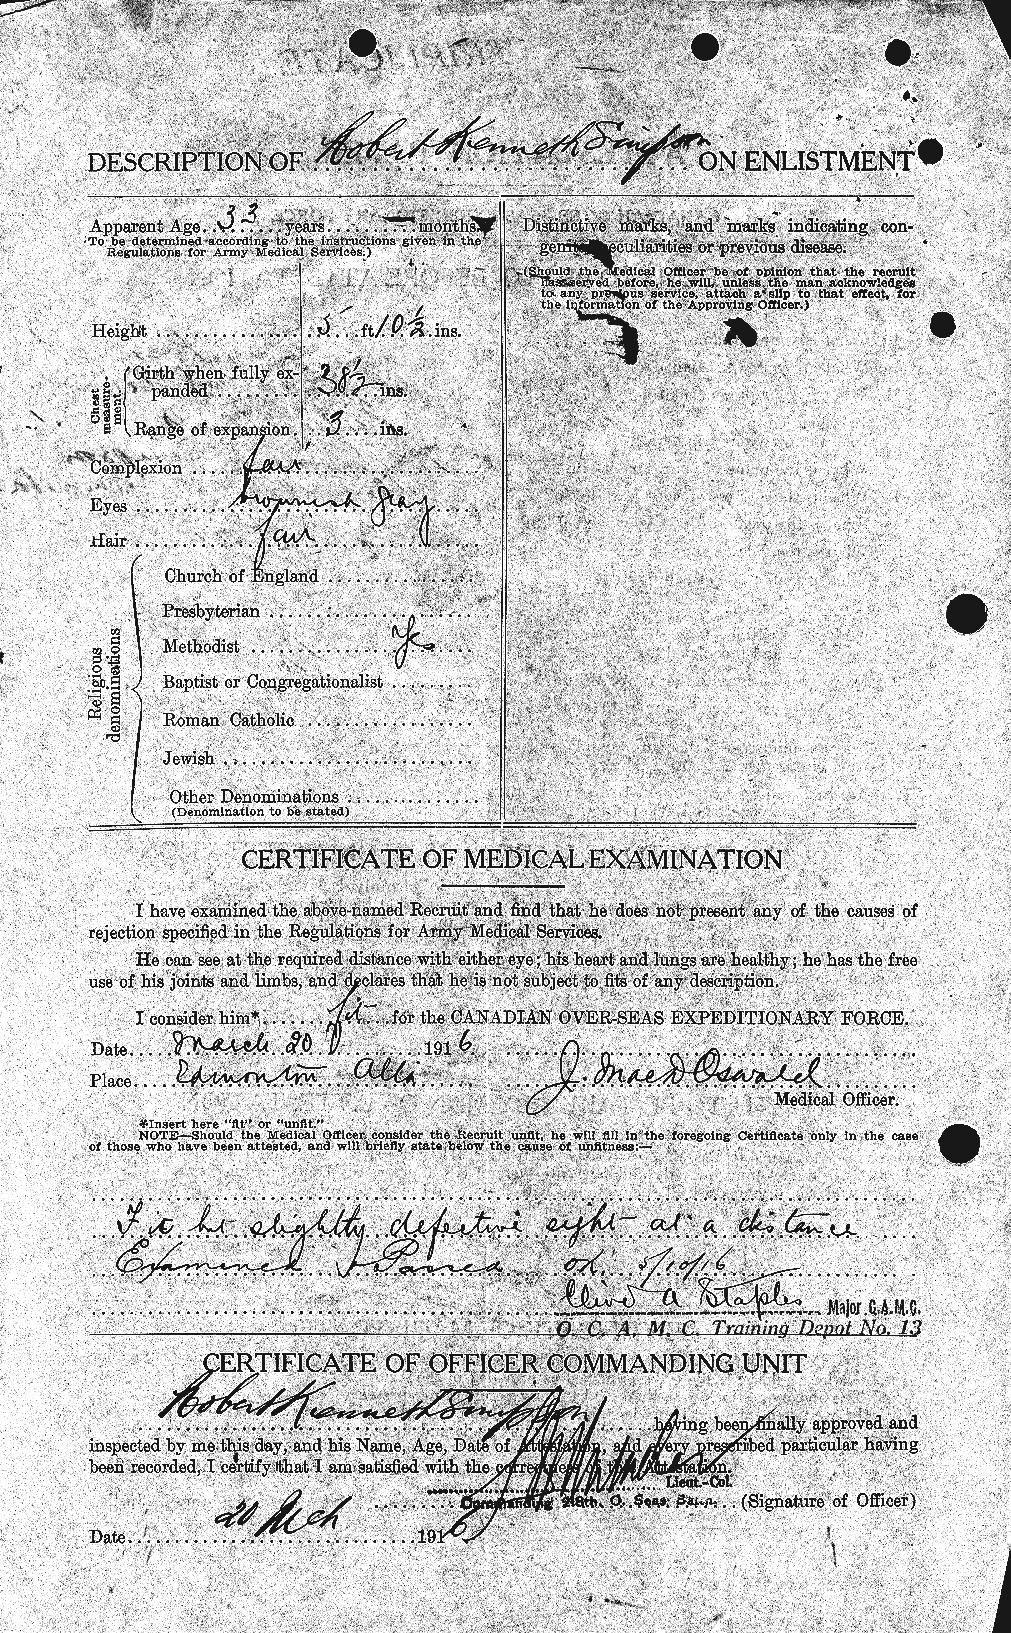 Personnel Records of the First World War - CEF 098625b